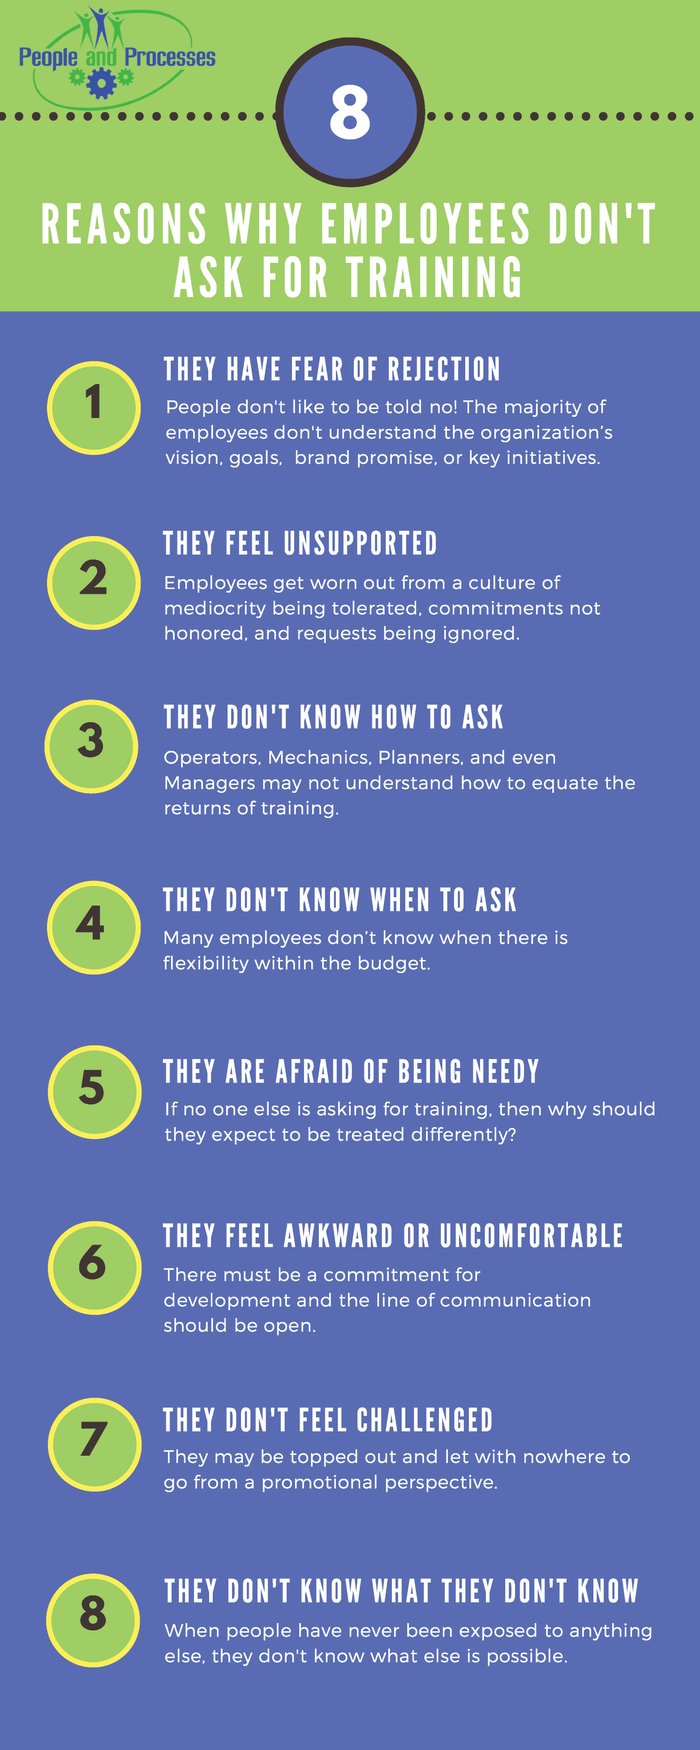 8 reasons why employees don't ask for training (1)